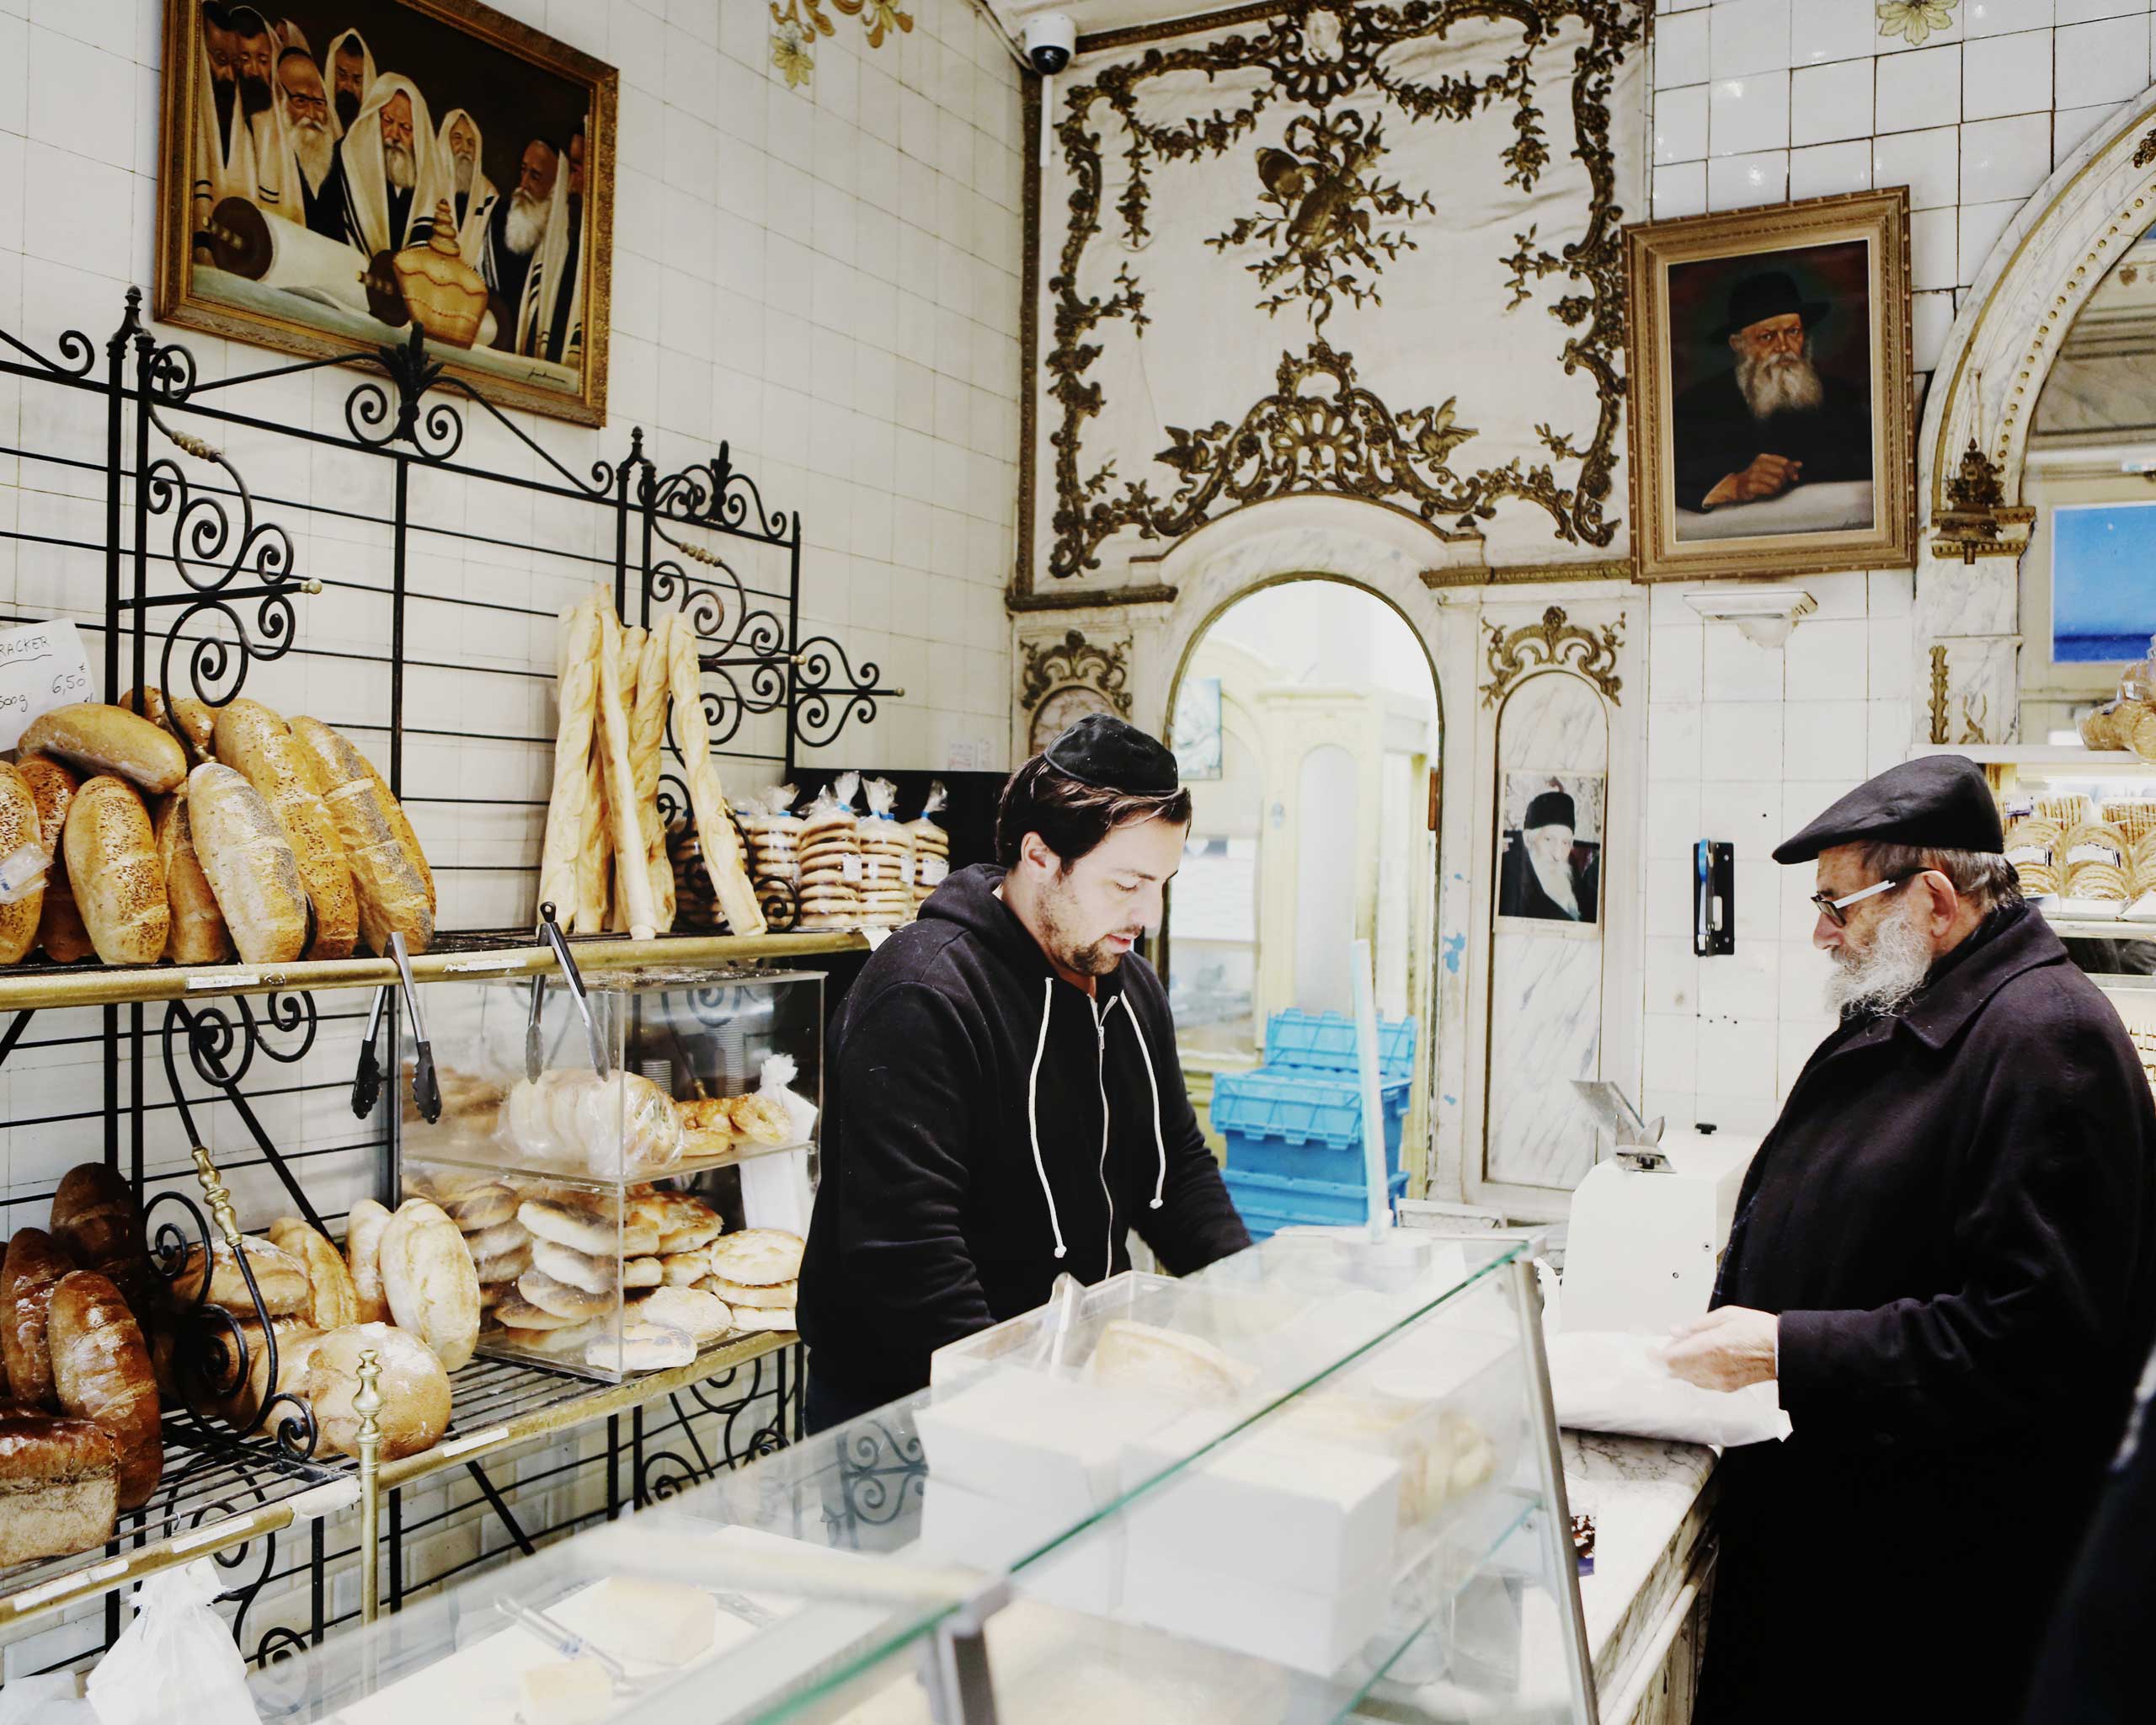 Life goes on at this Jewish bakery in the Marais, a traditionally Jewish quarter in Paris, France, Jan. 11, 2015. (Julien Pebrel—MYOP for TIME)